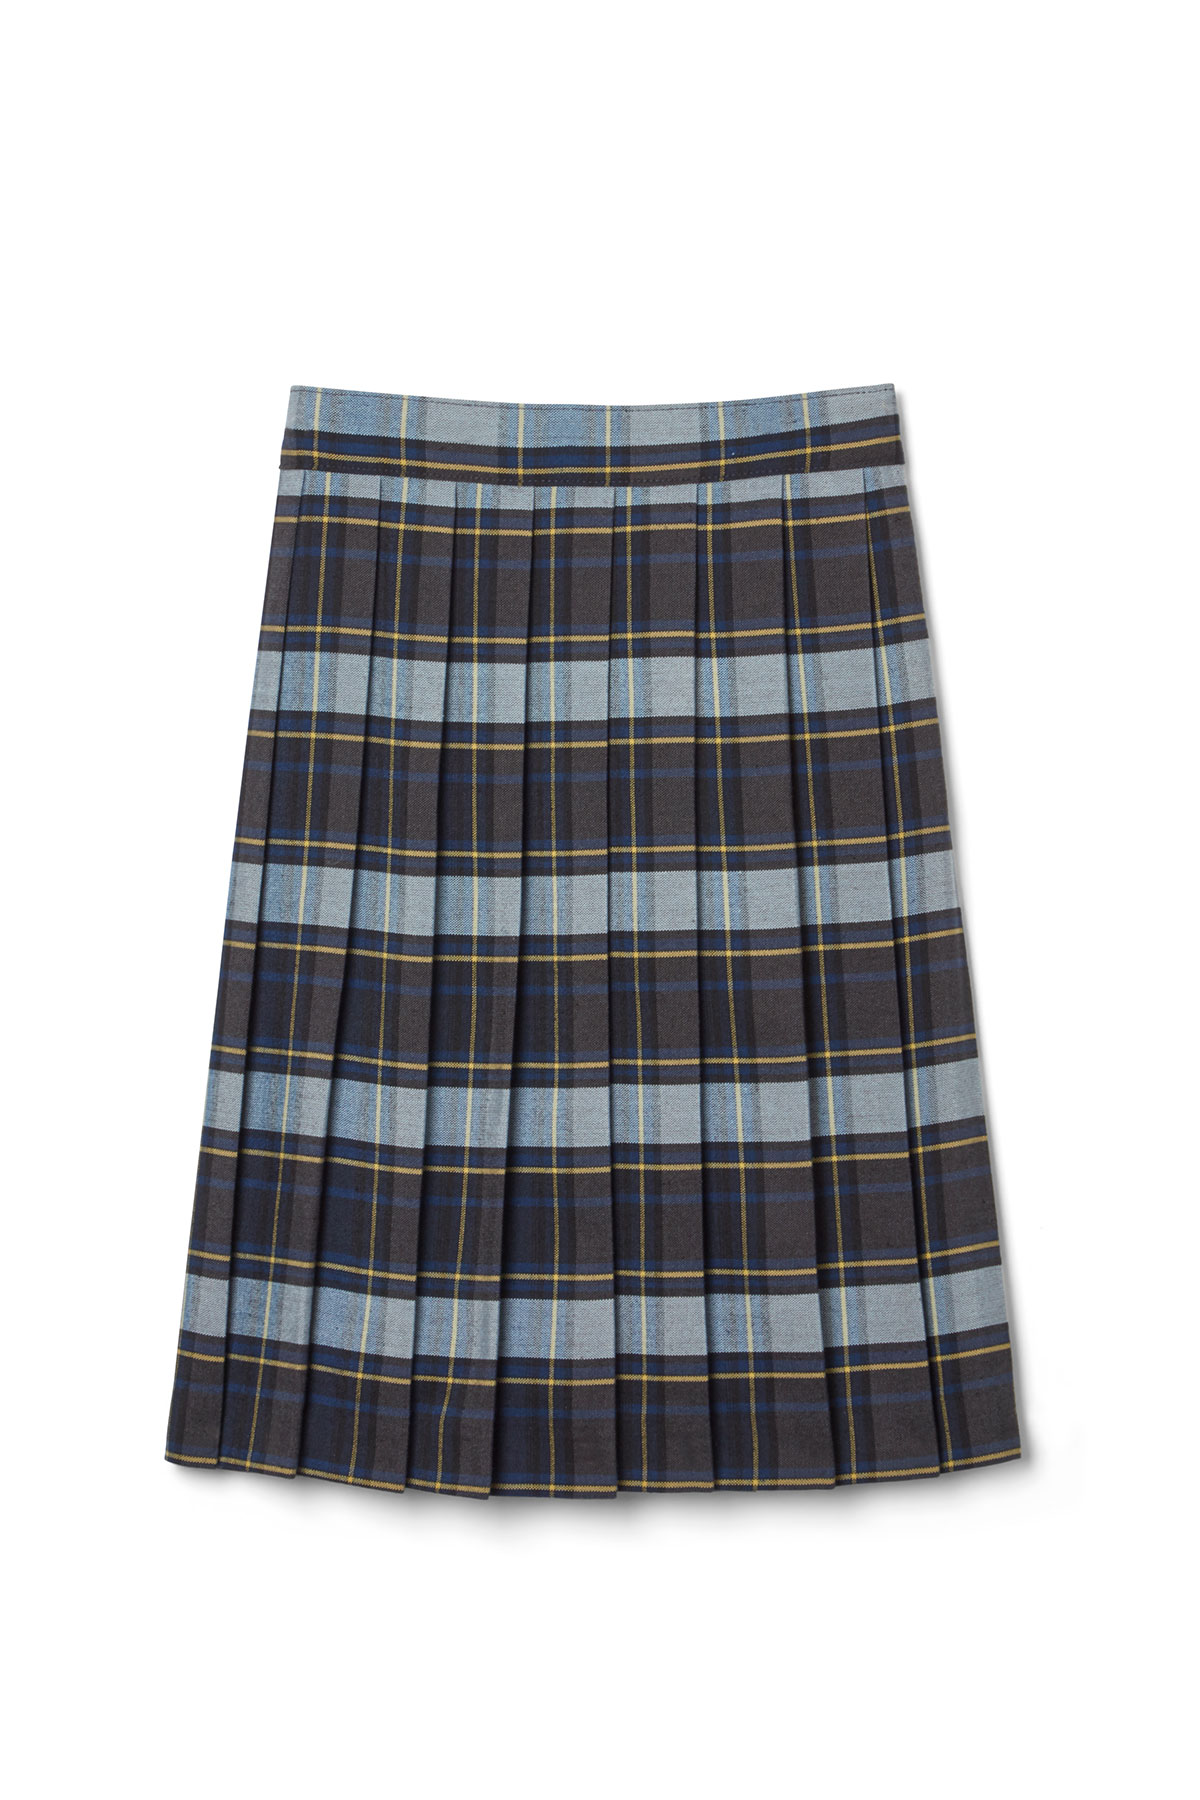 Plaid Below the Knee Skirt - French Toast